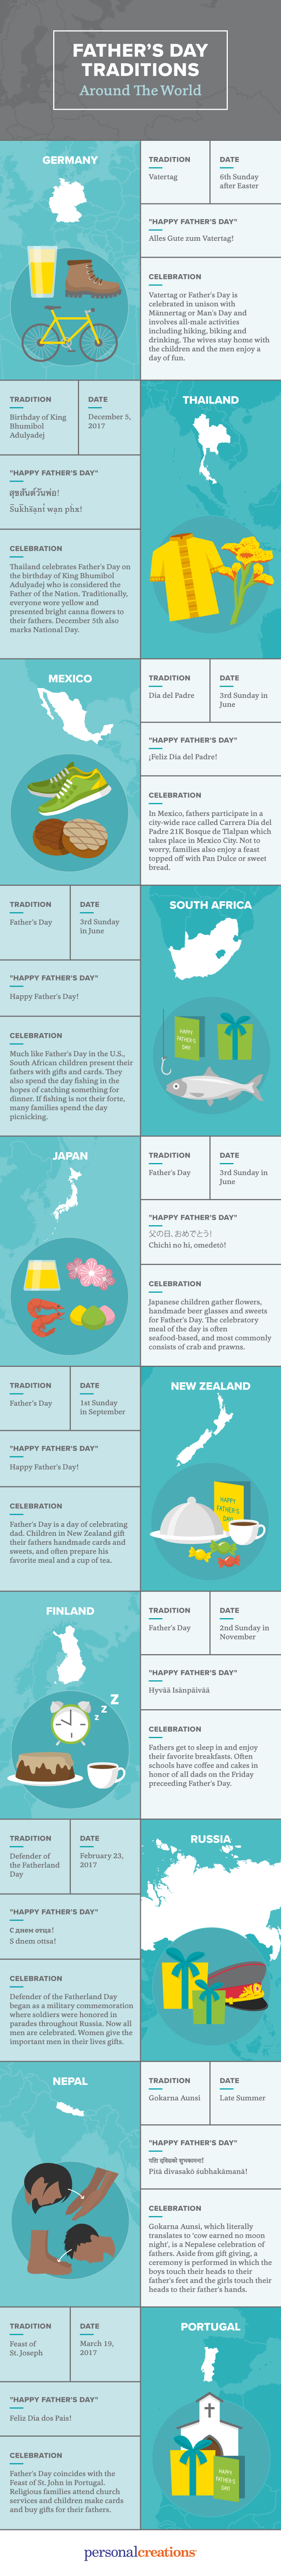 fathers day traditions around the world gift ideas